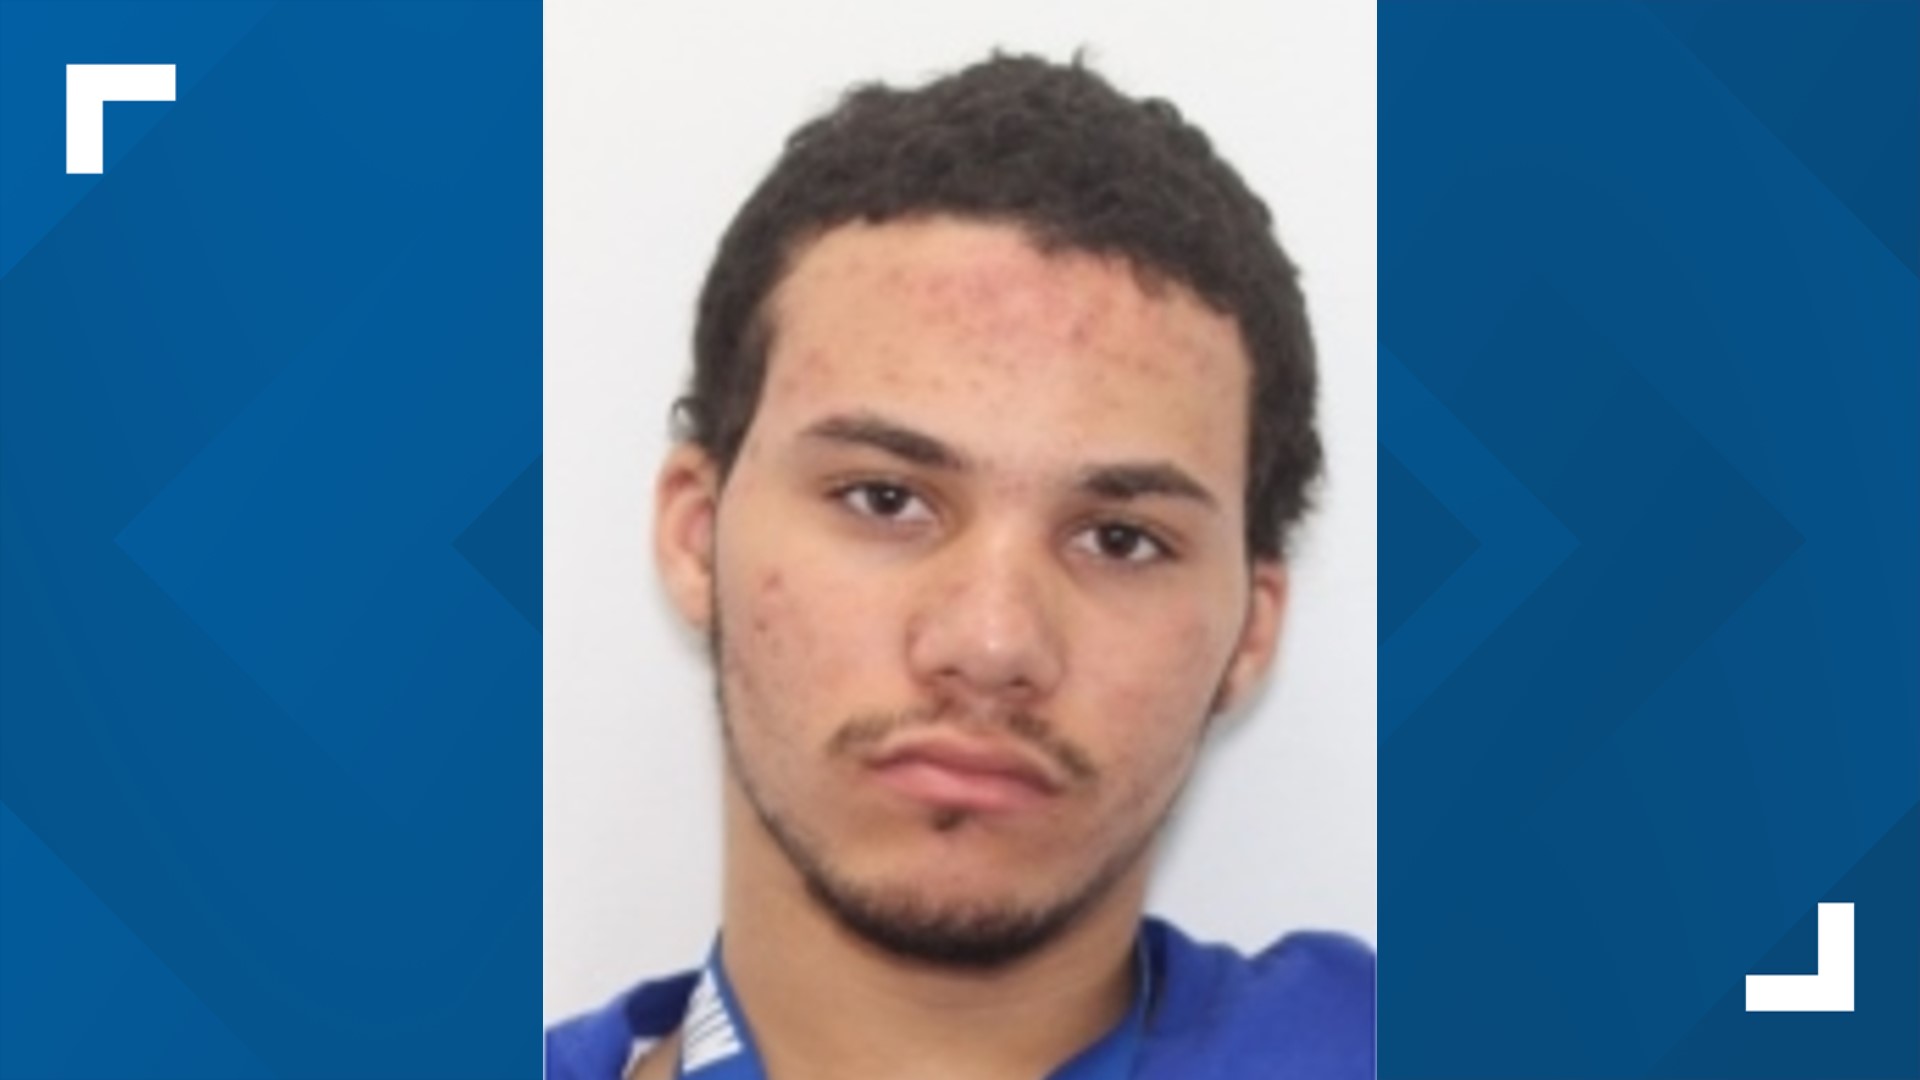 Officers responded to the 300 block of Jennings Avenue around 7 a.m. where they found the body of 19-year-old Joseph Andrews Jr.